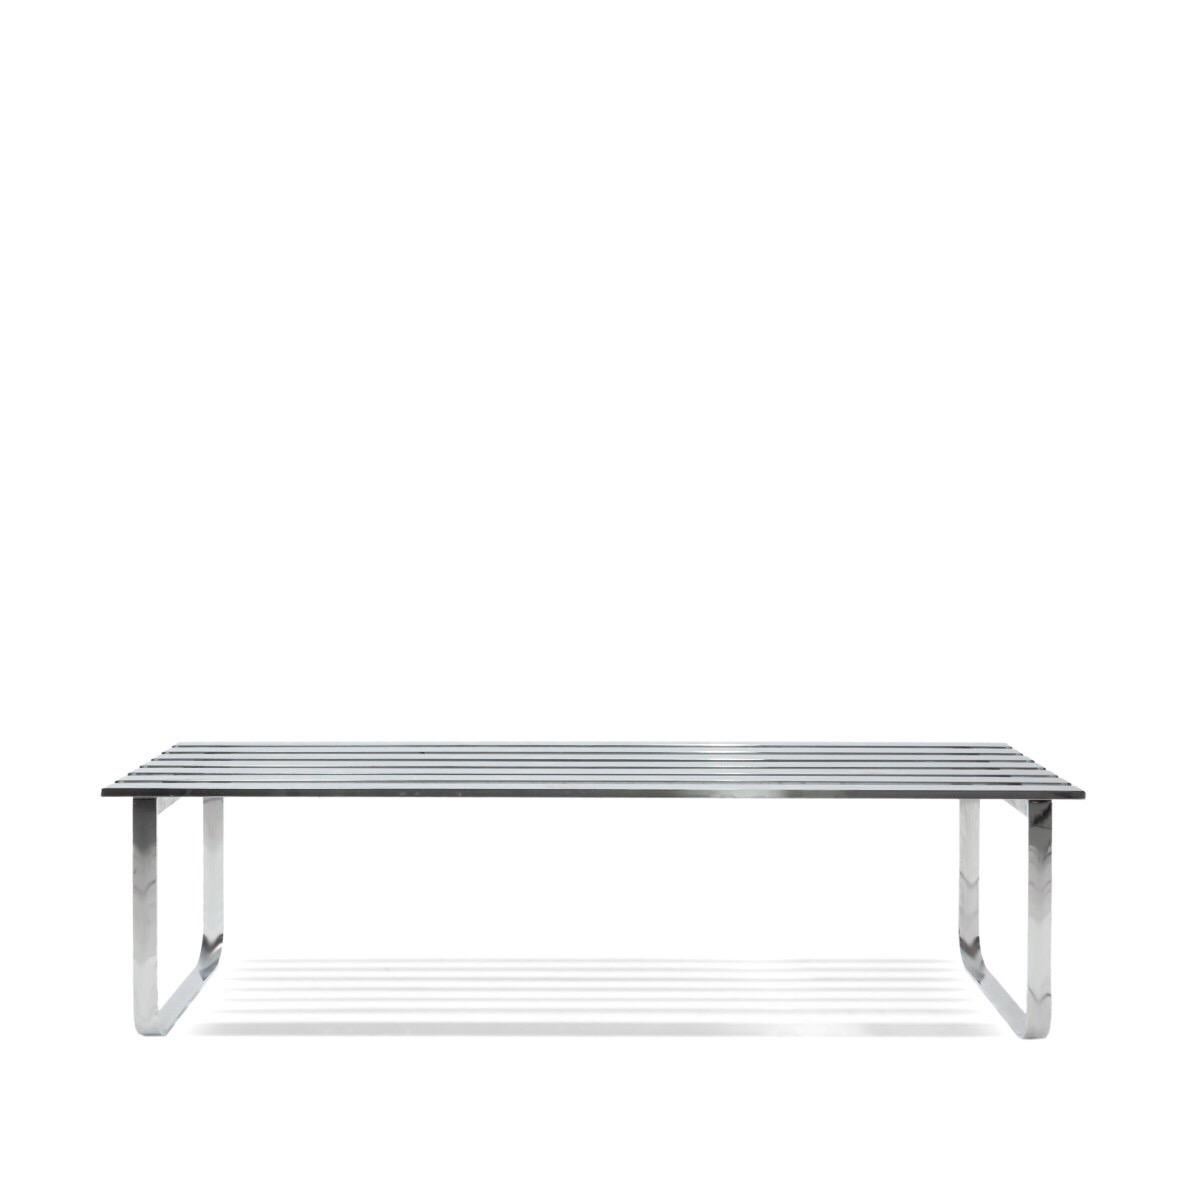 American Chrome Metal Slat Bench by Design Institute of America